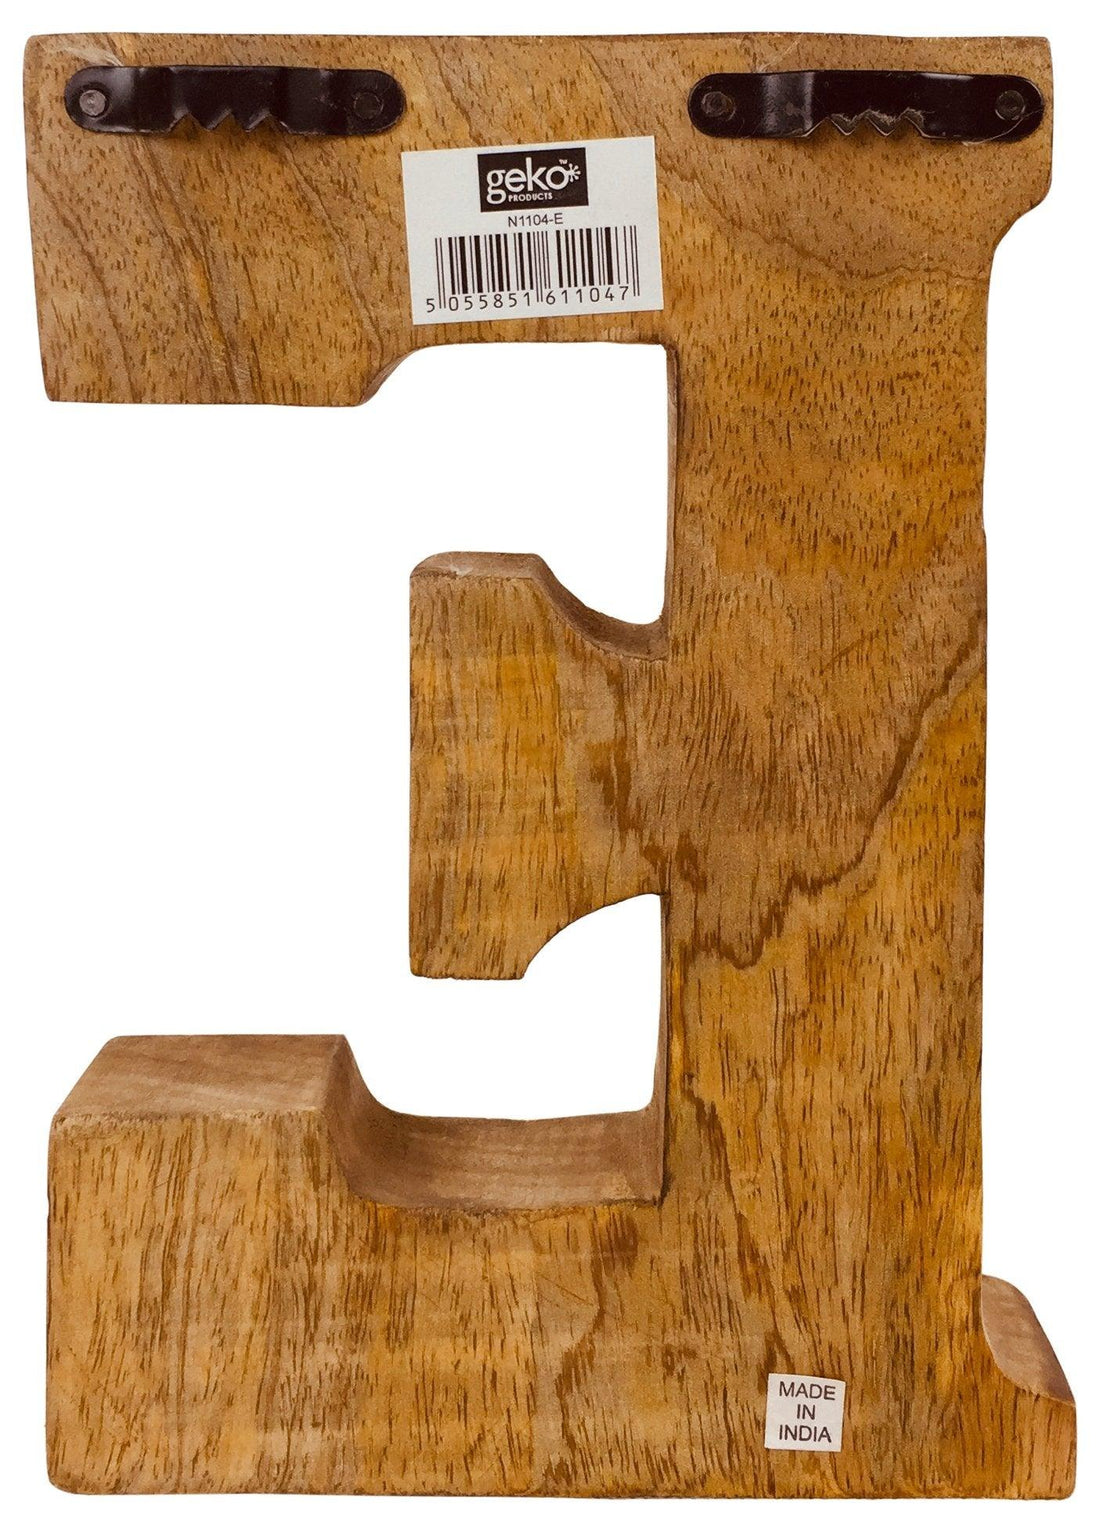 Hand Carved Wooden Embossed Letter E - £18.99 - Single Letters 